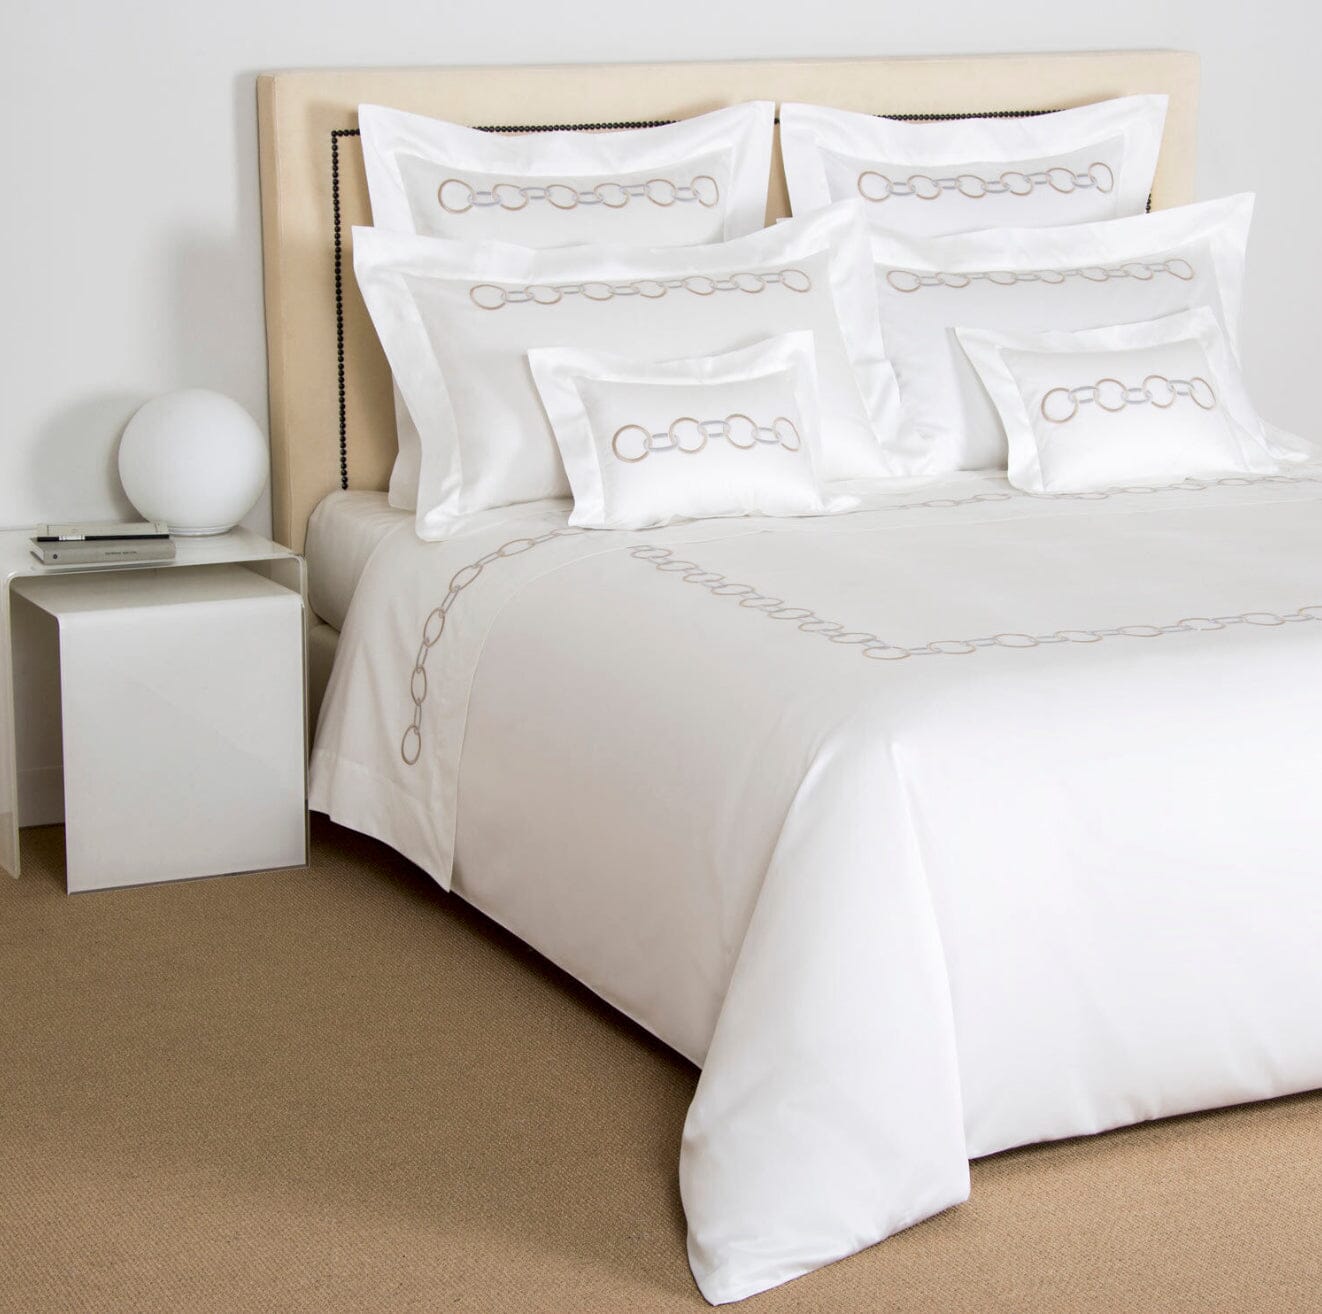 Frette Links Embroidery Cotton Sateen Bed Linens